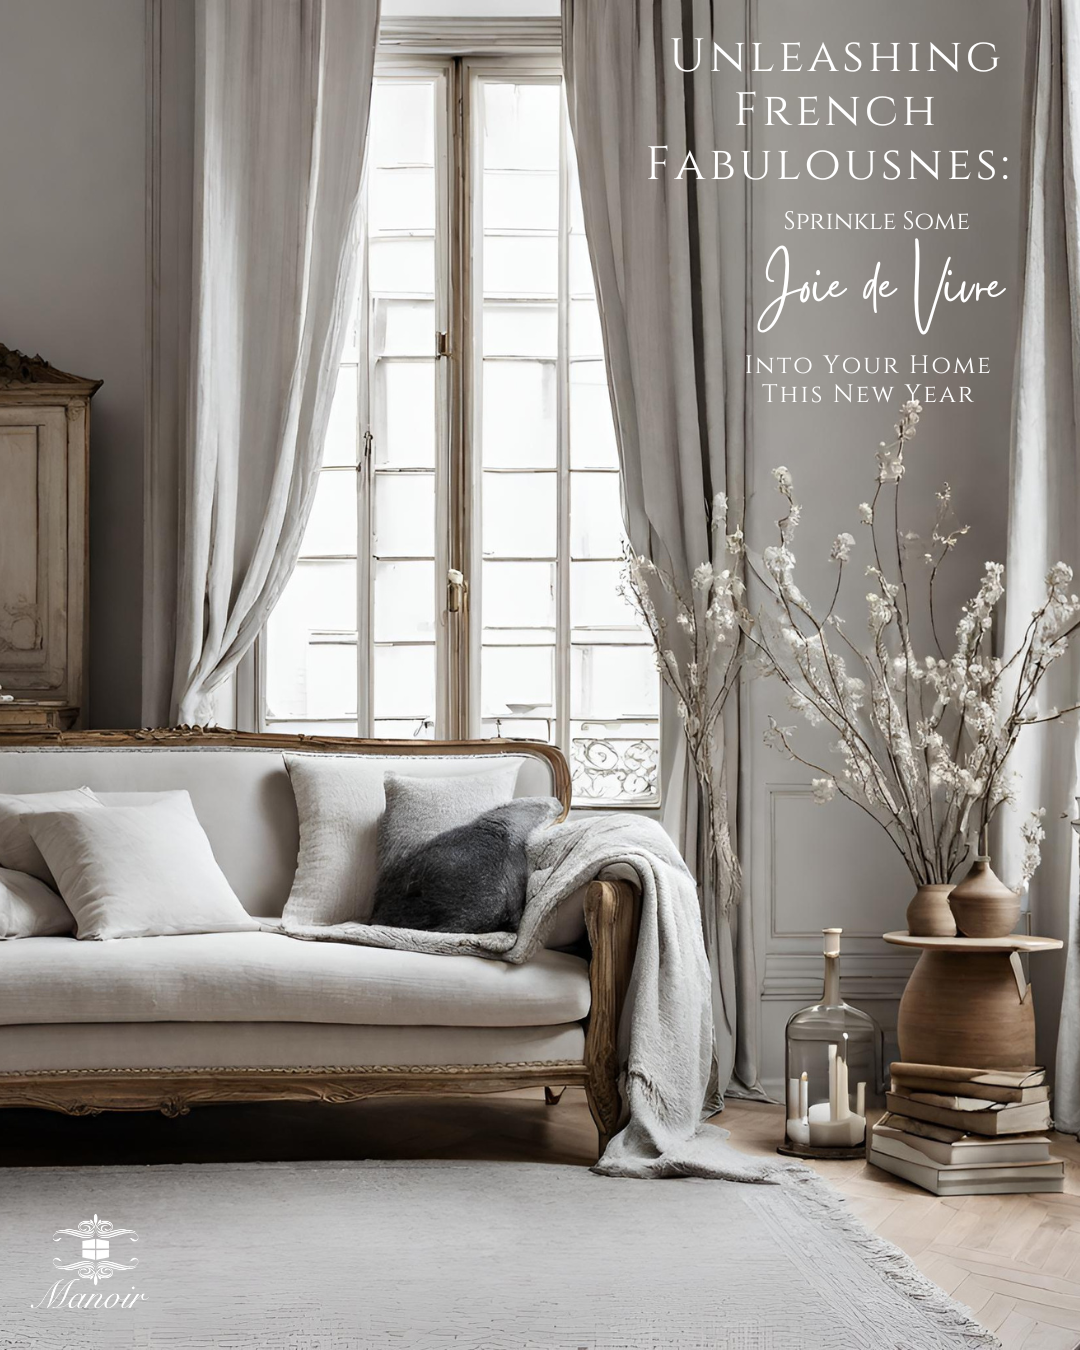 Unleashing French Fabulousness: Sprinkle Some Joie de Vivre Into Your Home This New Year